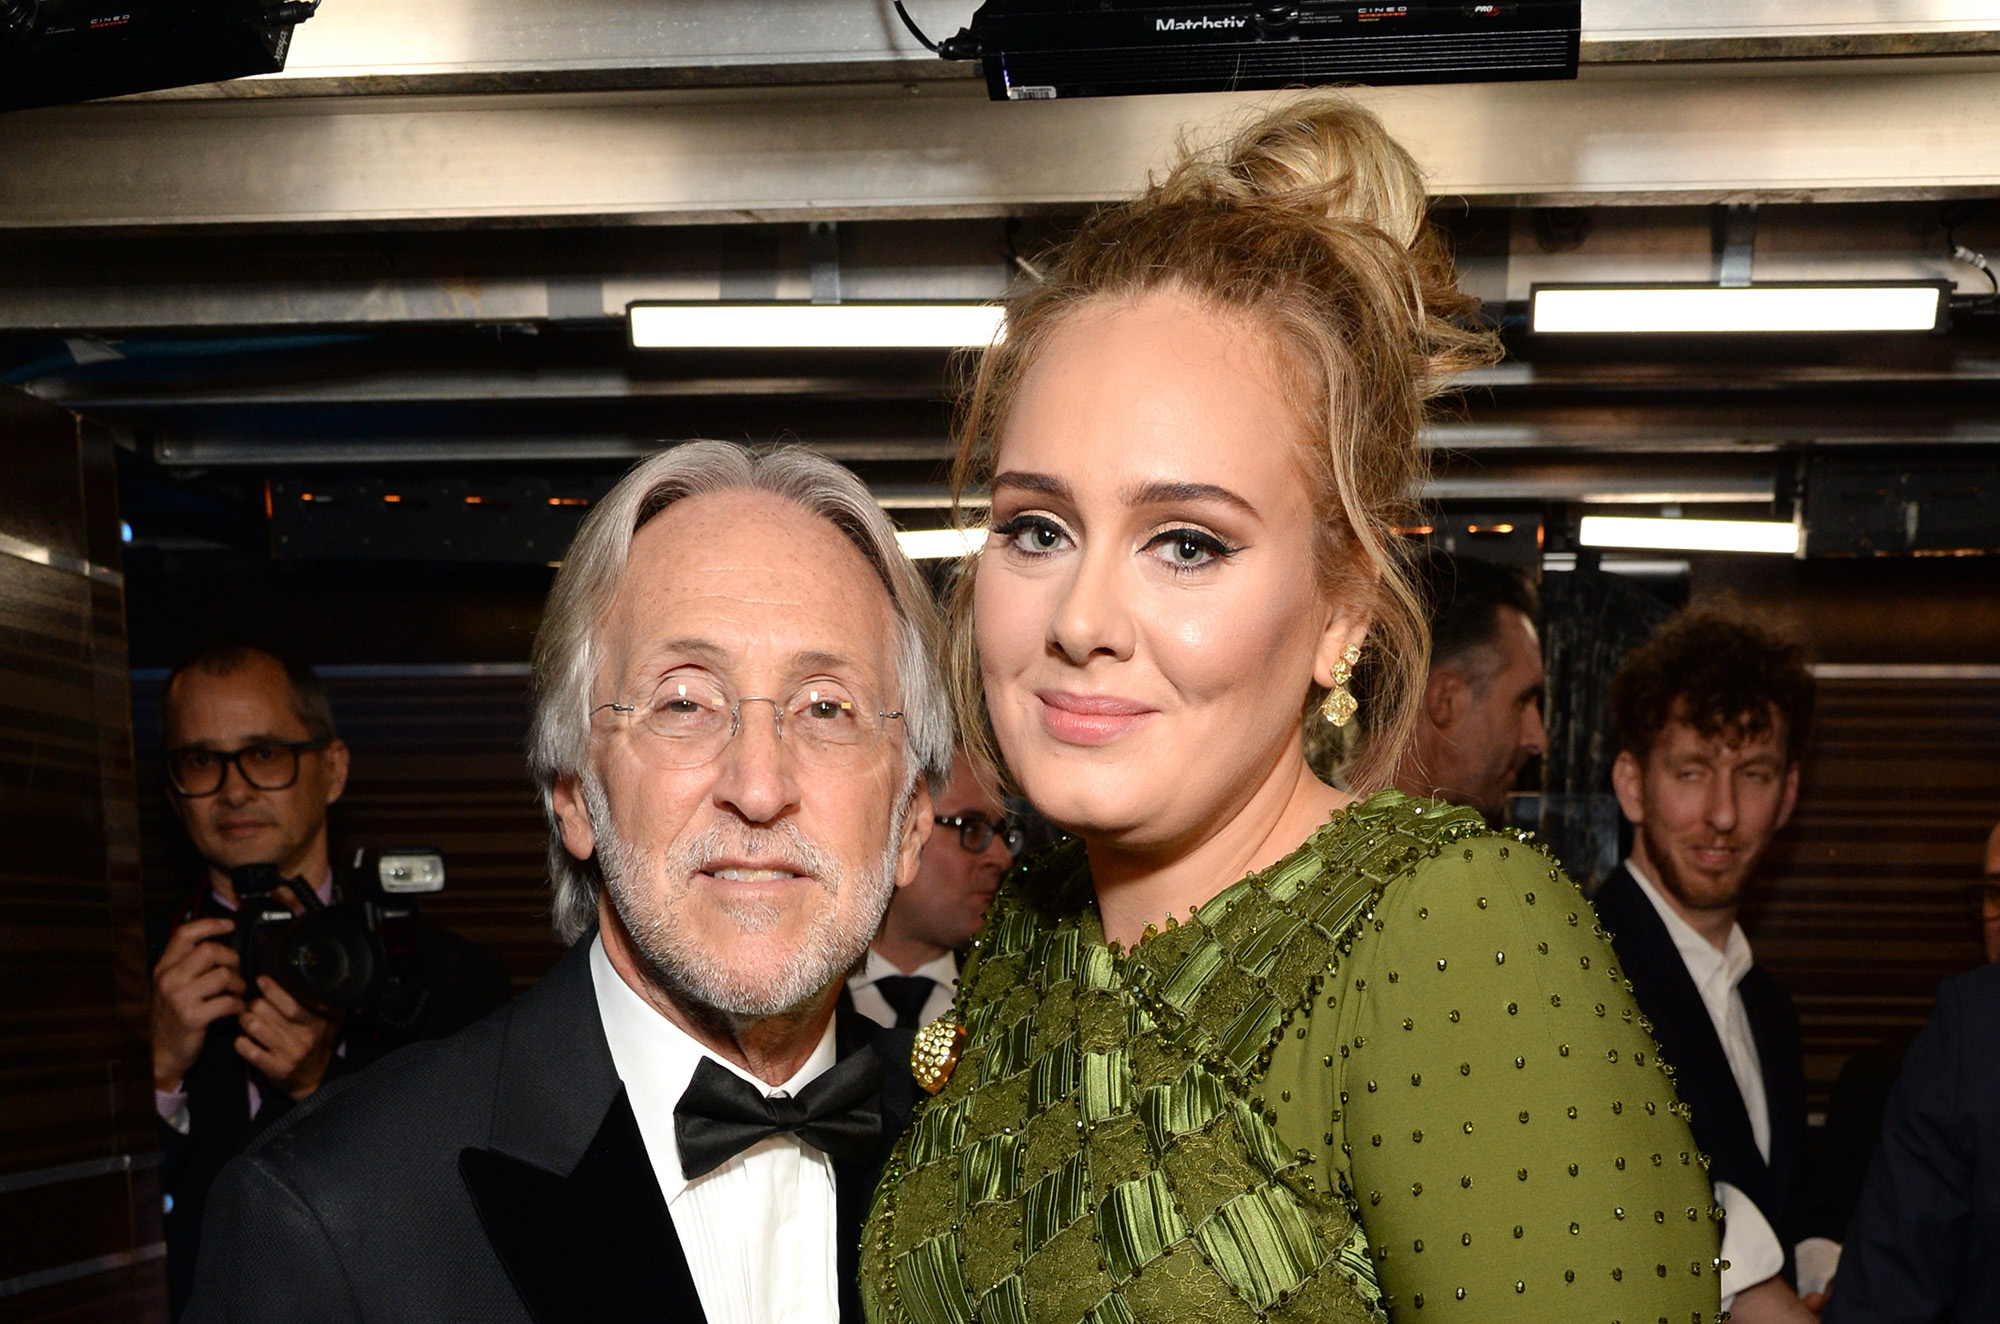 President/CEO of The Recording Academy and GRAMMY Foundation President/CEO Neil Portnow (L) and Adele backstage during during the The 59th GRAMMY Awards. (Michael Kovac&mdash;Getty Images for NARAS)